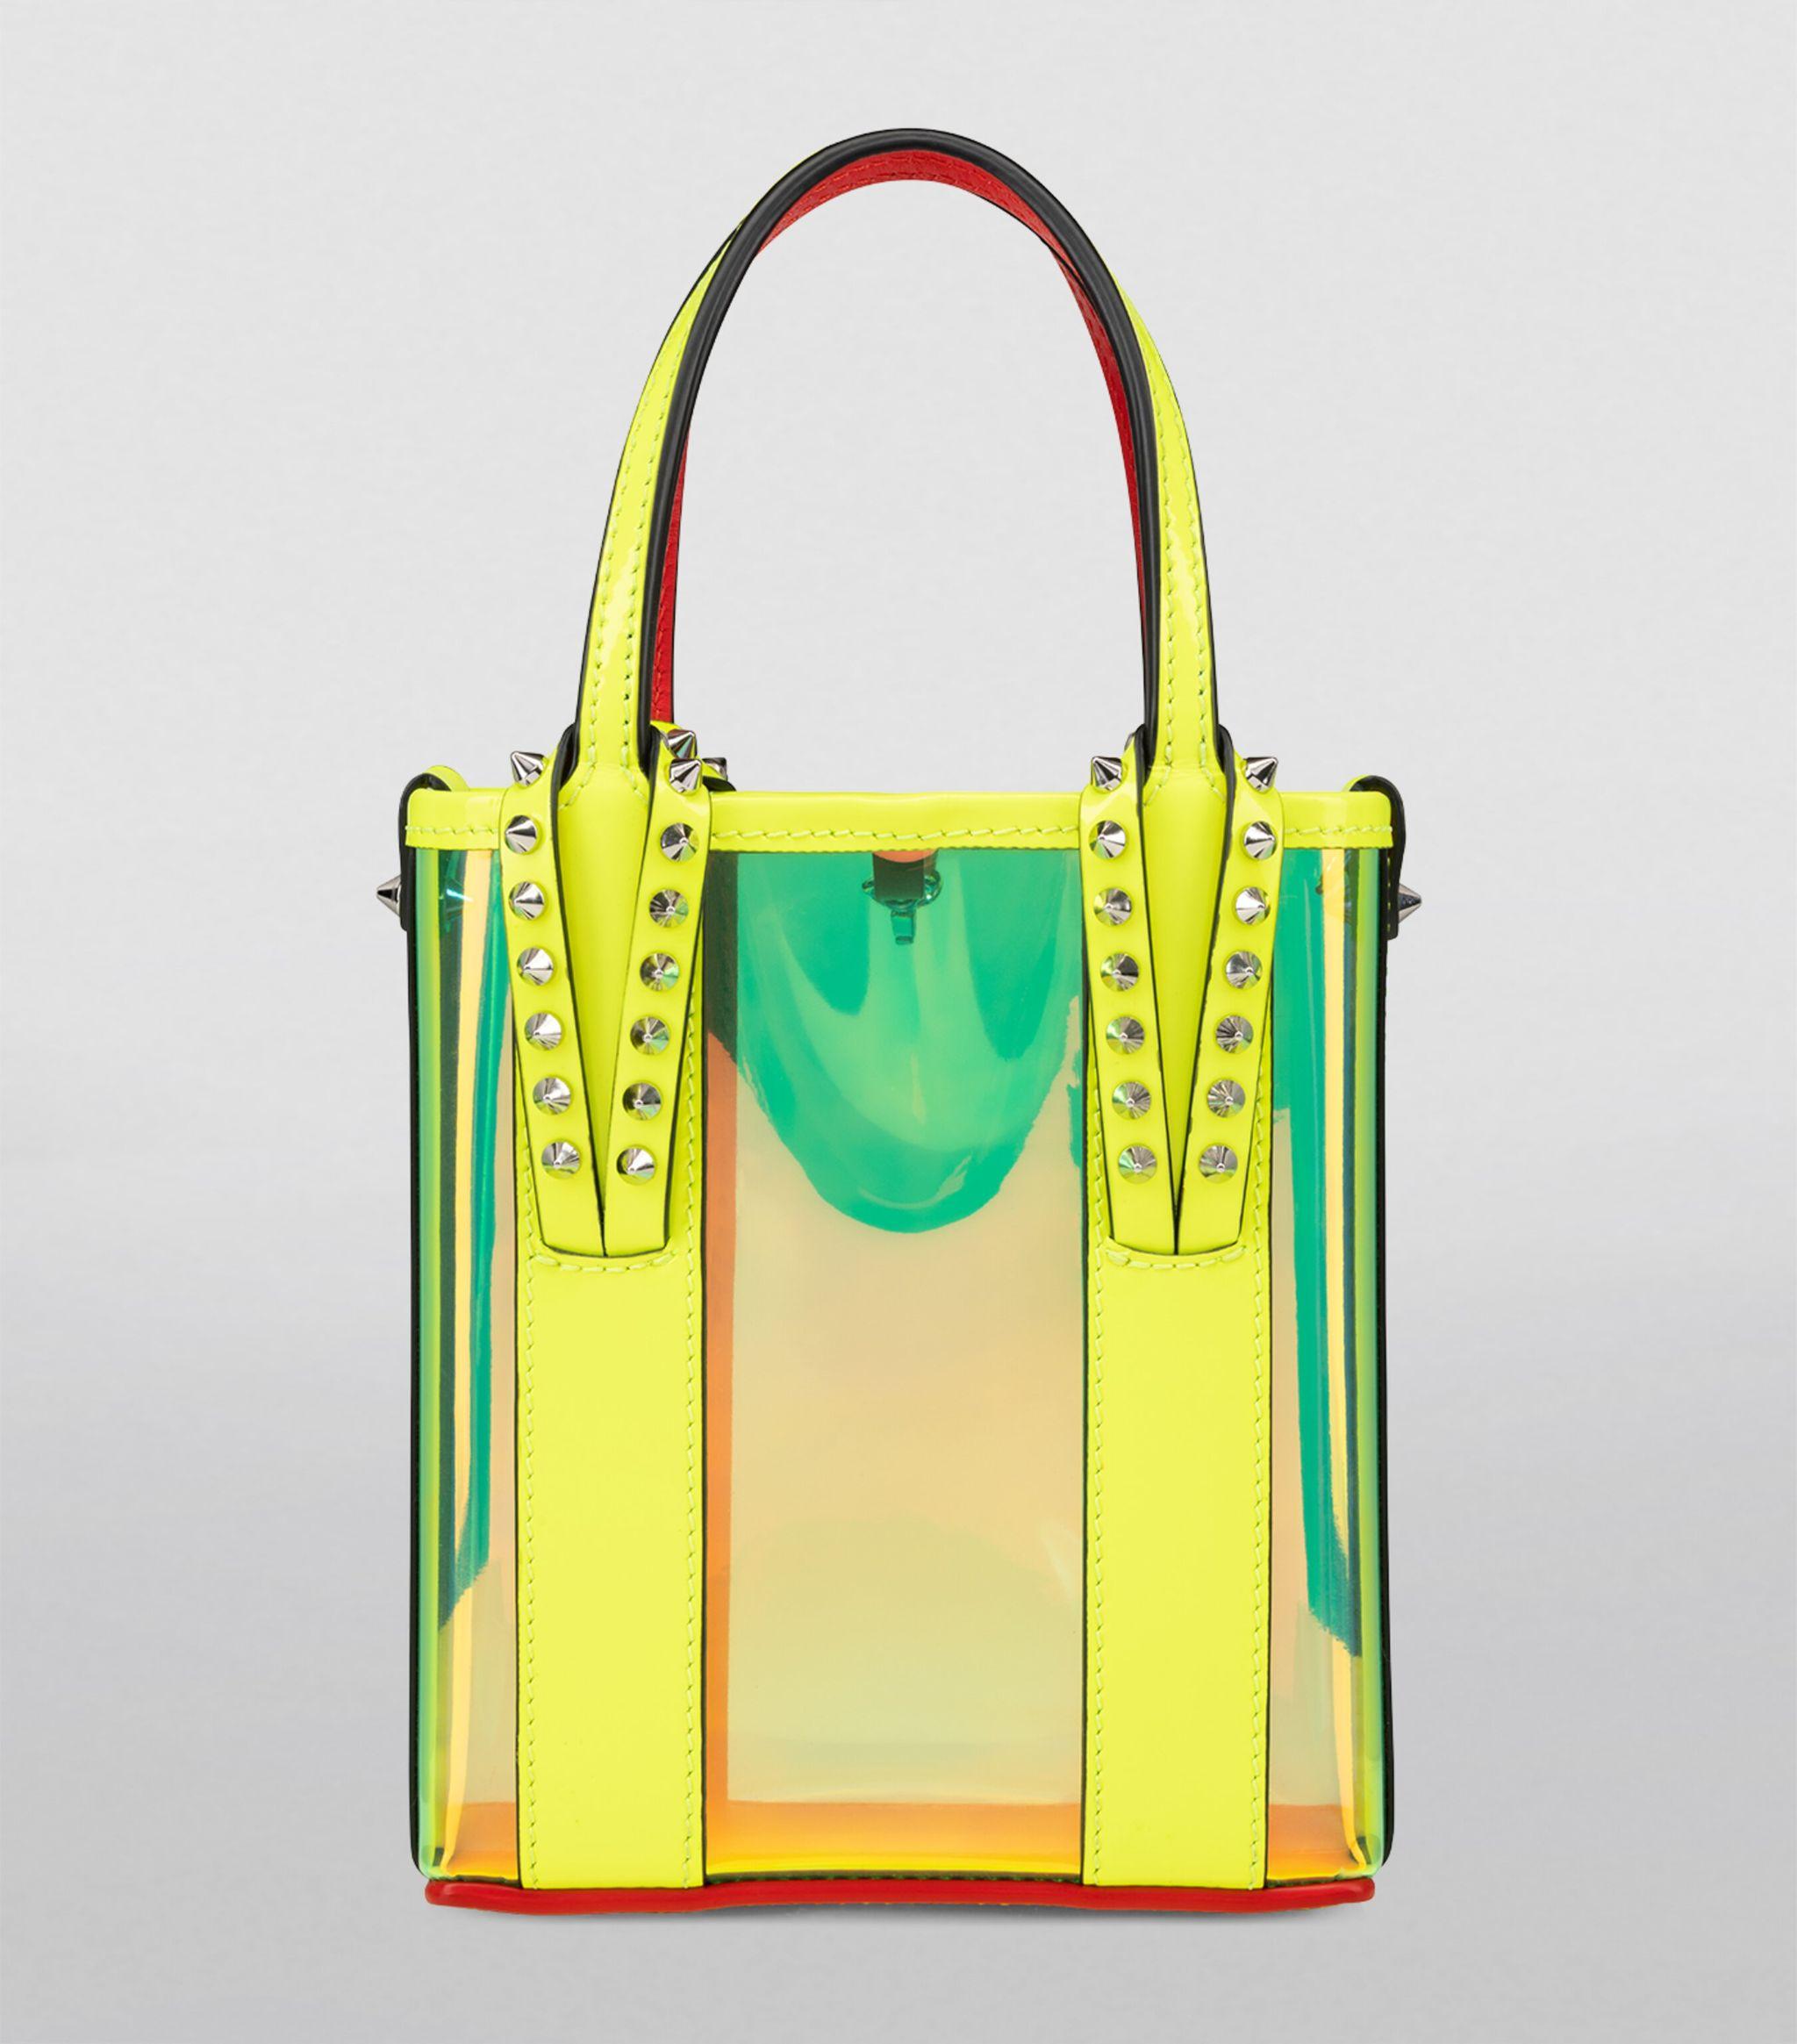 New Christian Louboutin Nano Cabata East/West Leather Tote Yellow